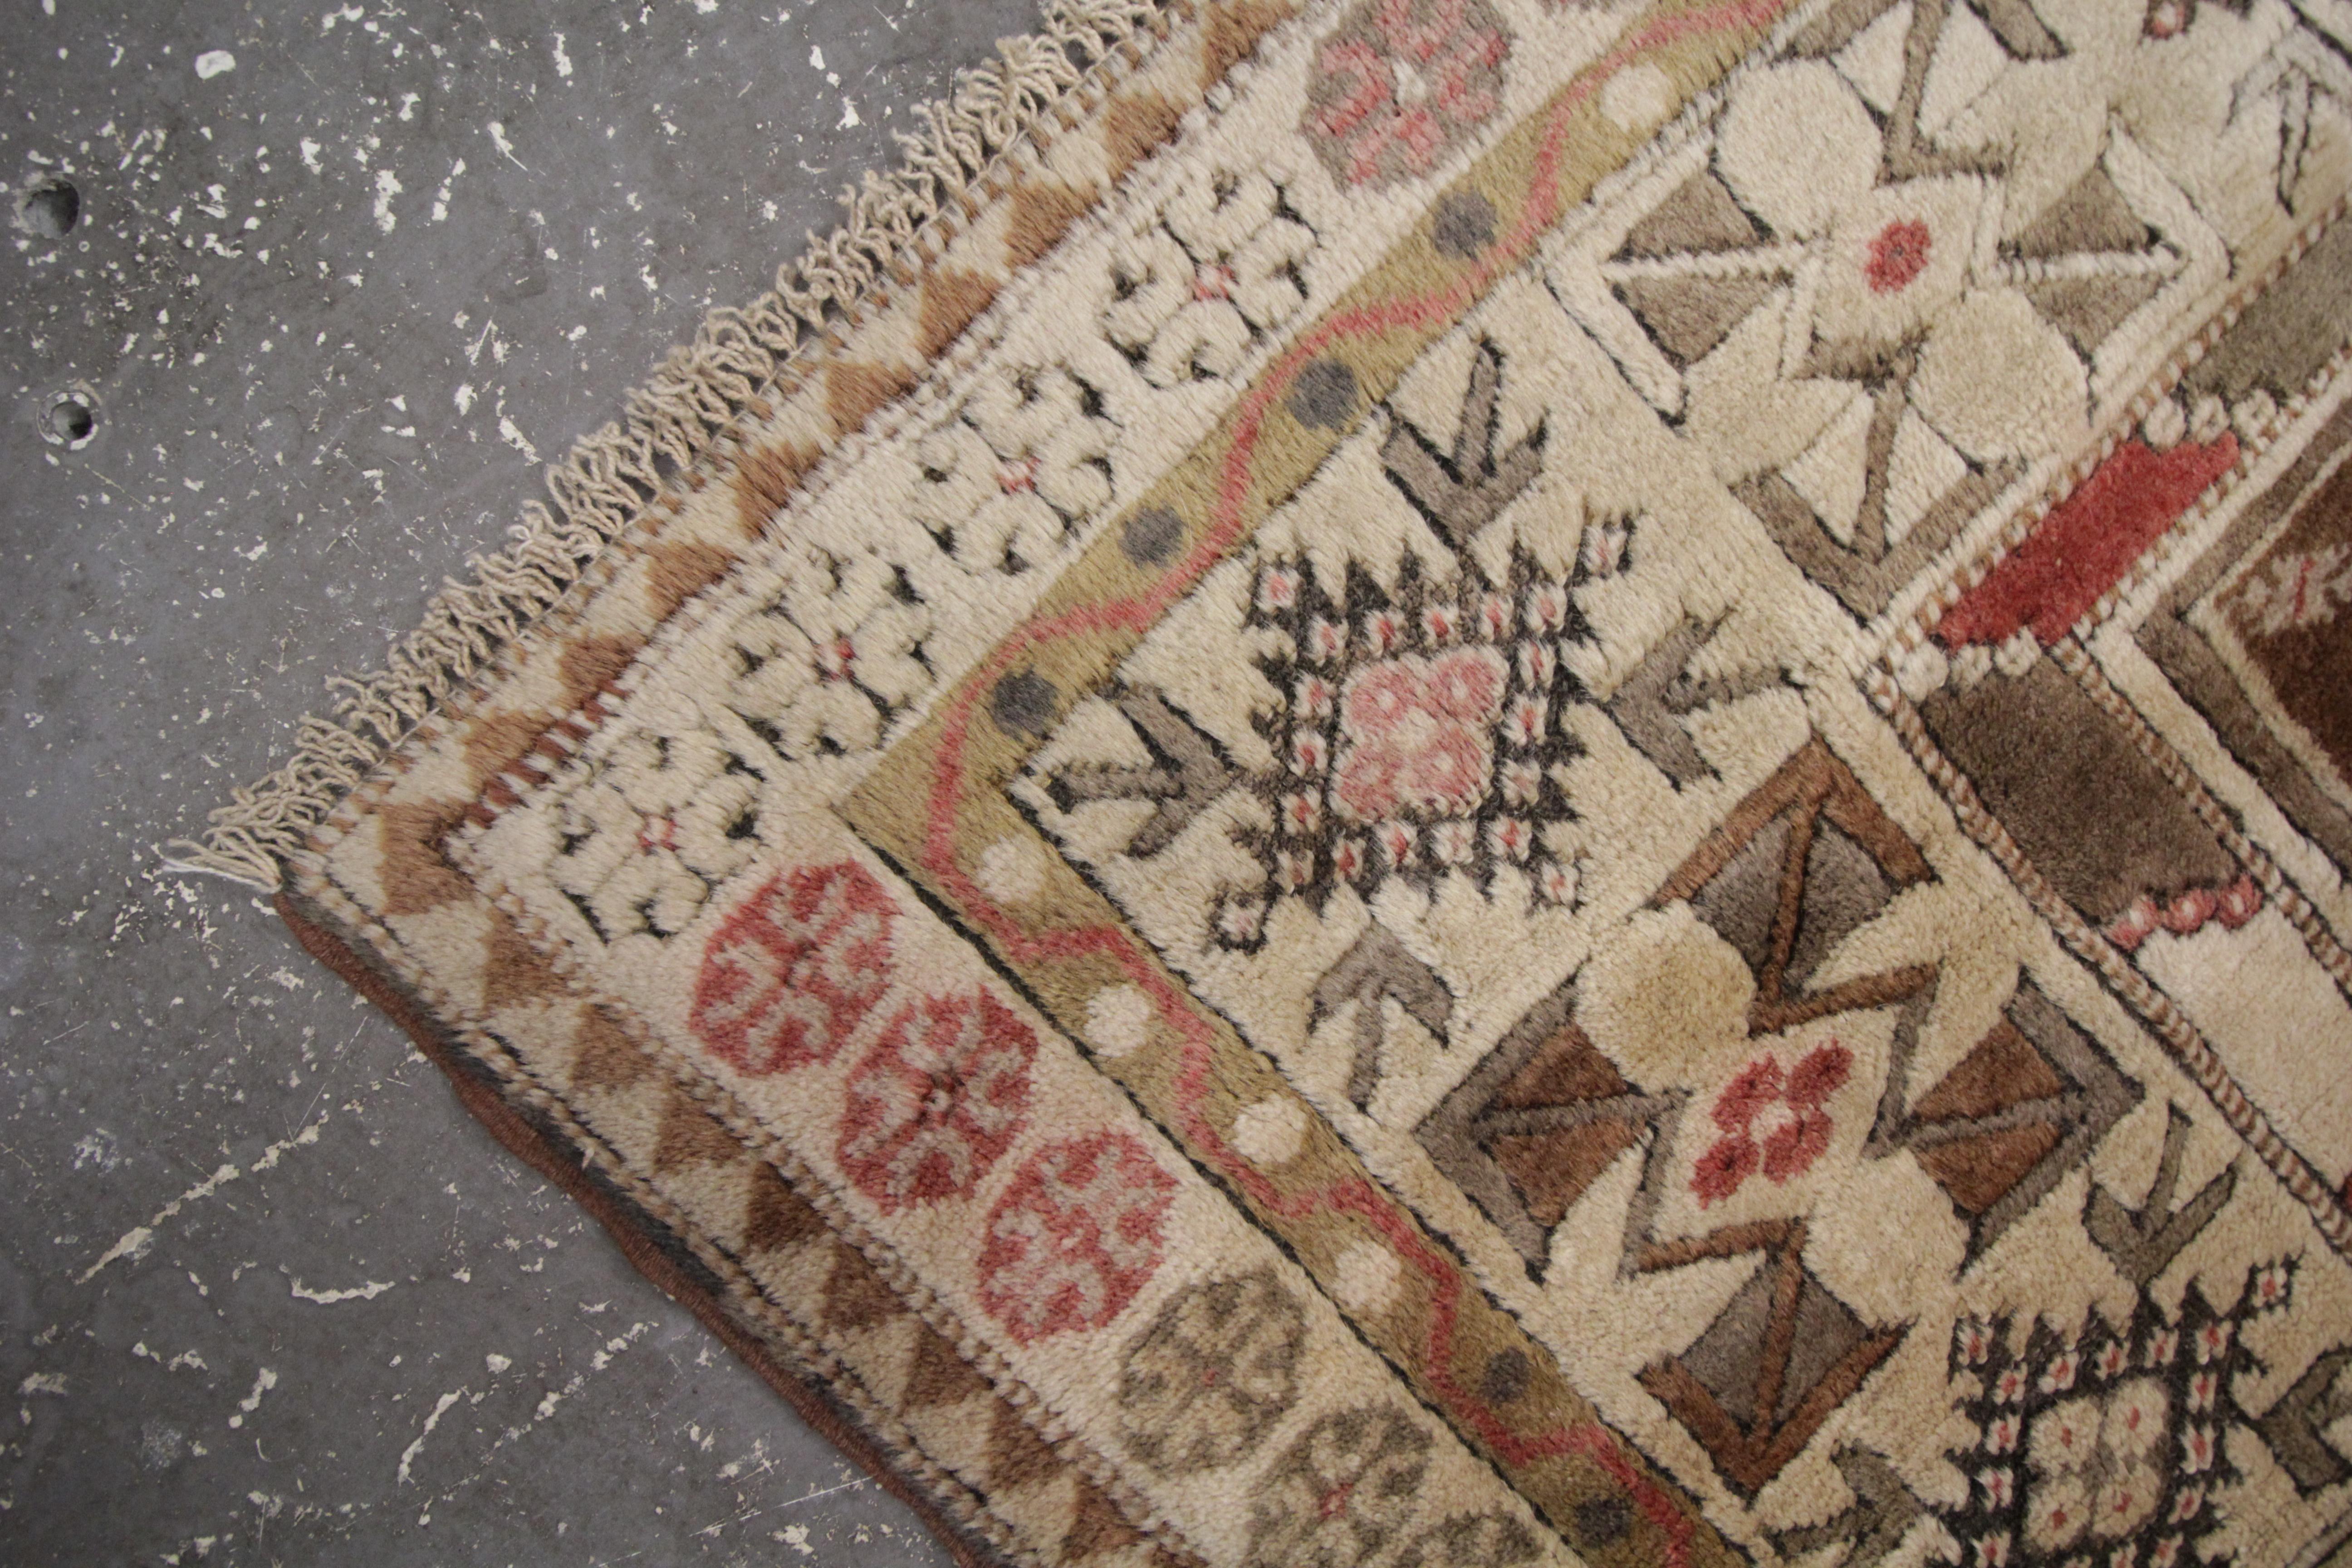 Antique Turkish Rugs, Vintage Rug Milas, Brown Rug, Handmade Carpet  In Excellent Condition For Sale In Hampshire, GB